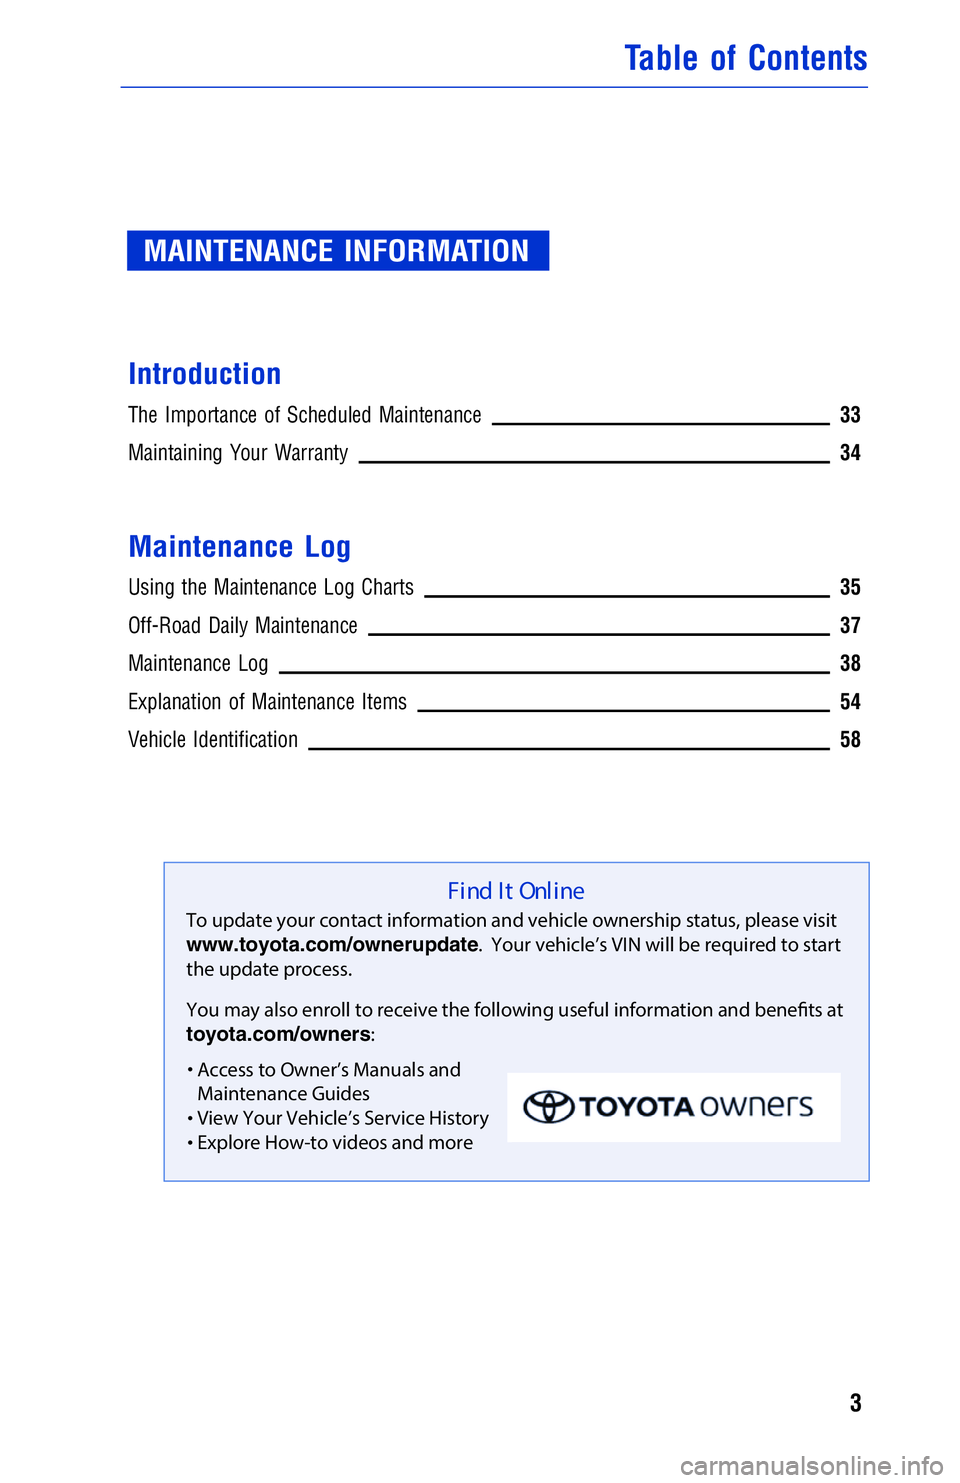 TOYOTA TACOMA 2017  Warranties & Maintenance Guides (in English) JOBNAME: 2372852-en-2017_TACO PAGE: 3 SESS: 3 OUTPUT: Wed Jul 13 07:48:07 2016
/InfoShareAuthorCODA/InfoShareAuthorCODA/TS_Warr_Maint/2372852-en-2017_T\
ACOMA.00505-17WMG-TAC_/TS_Warr_Maint_v1
MAINTEN